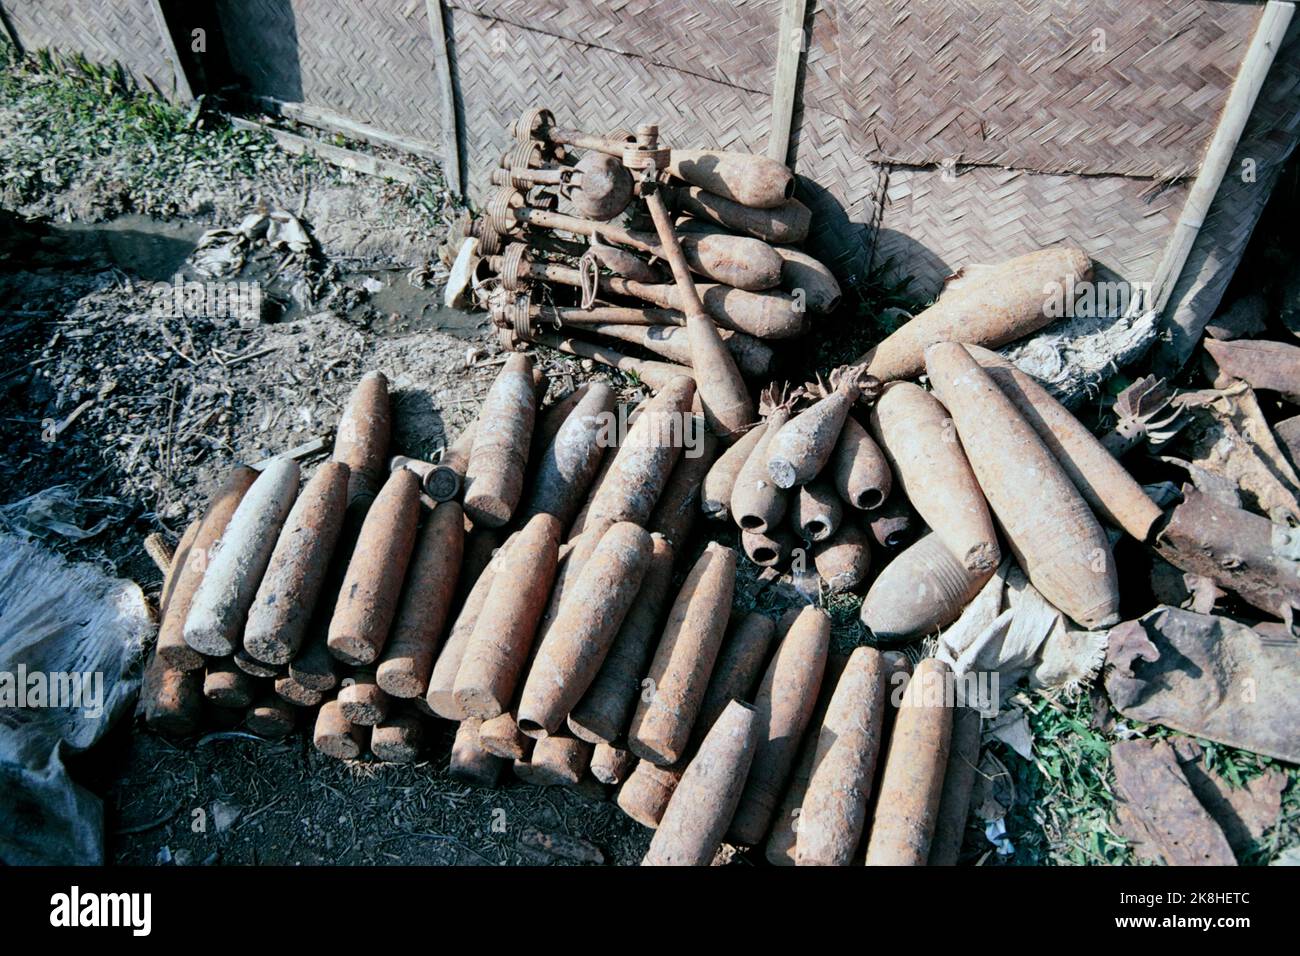 US-made cluster bomb casings collected and placed at roadside scrap yard, Plain of Jars, Laos 1997 Stock Photo